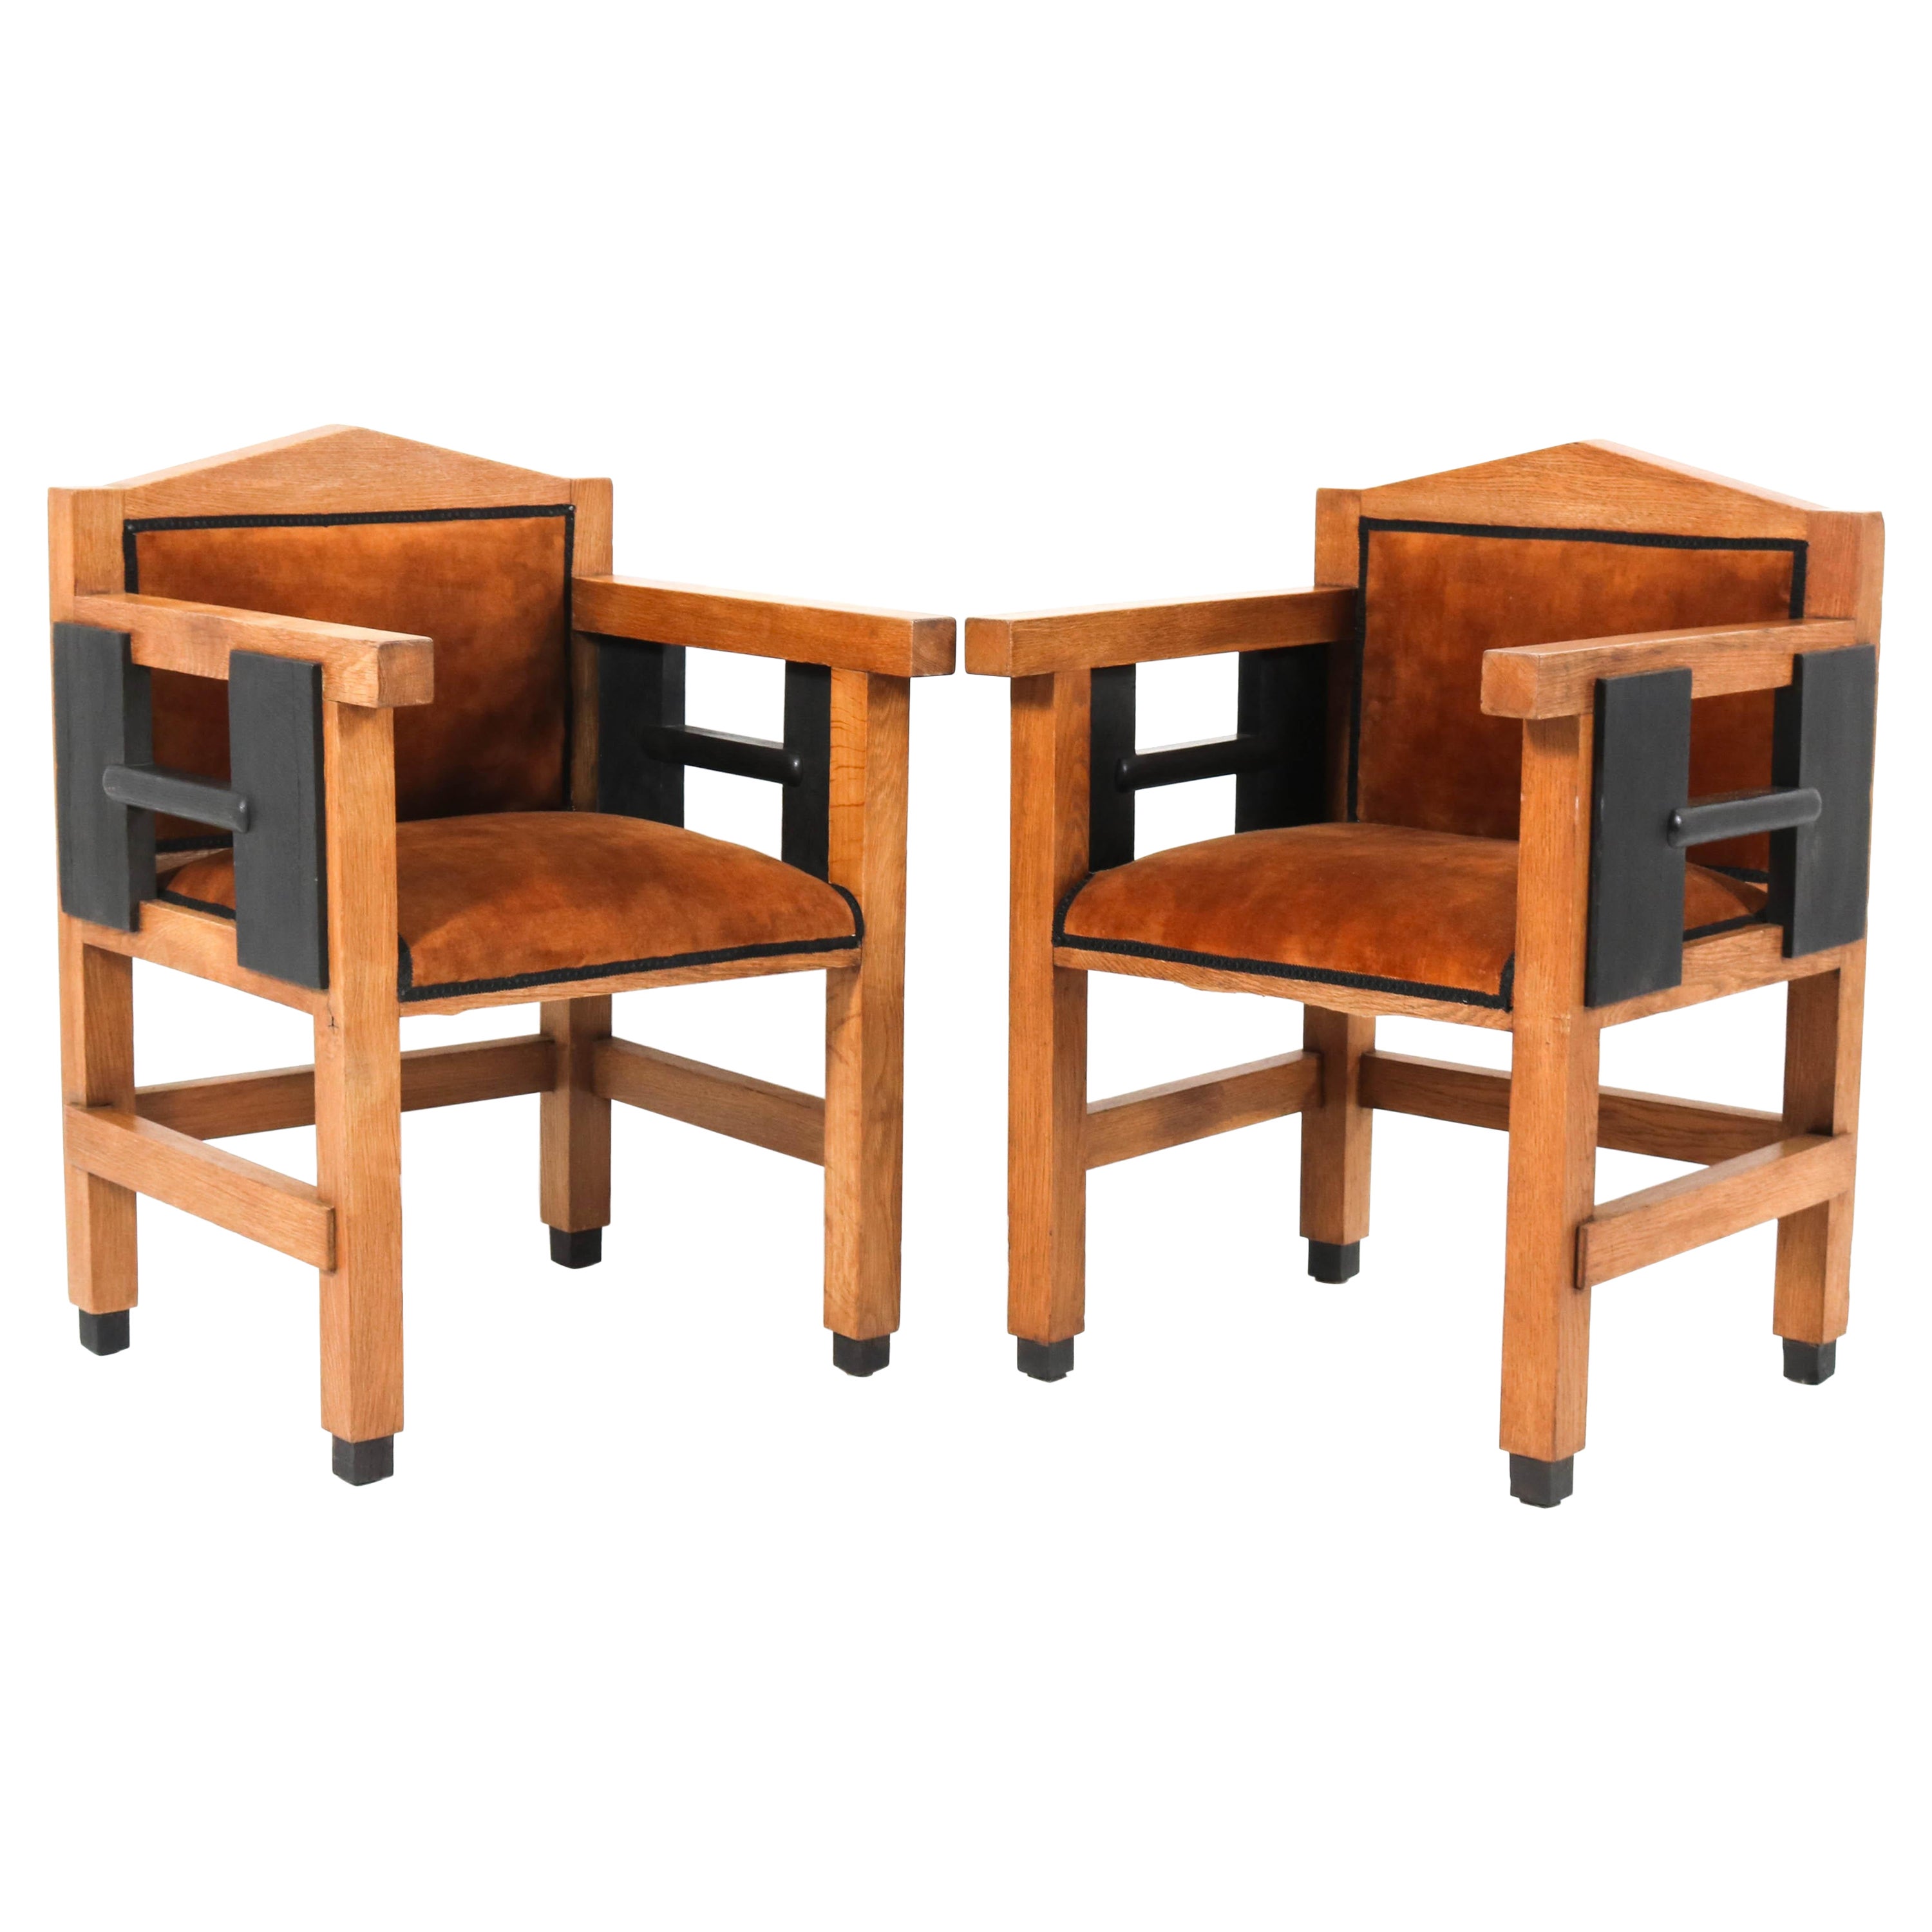 Two Oak Art Deco Haagse School Armchairs by Jacques Grubben, 1930